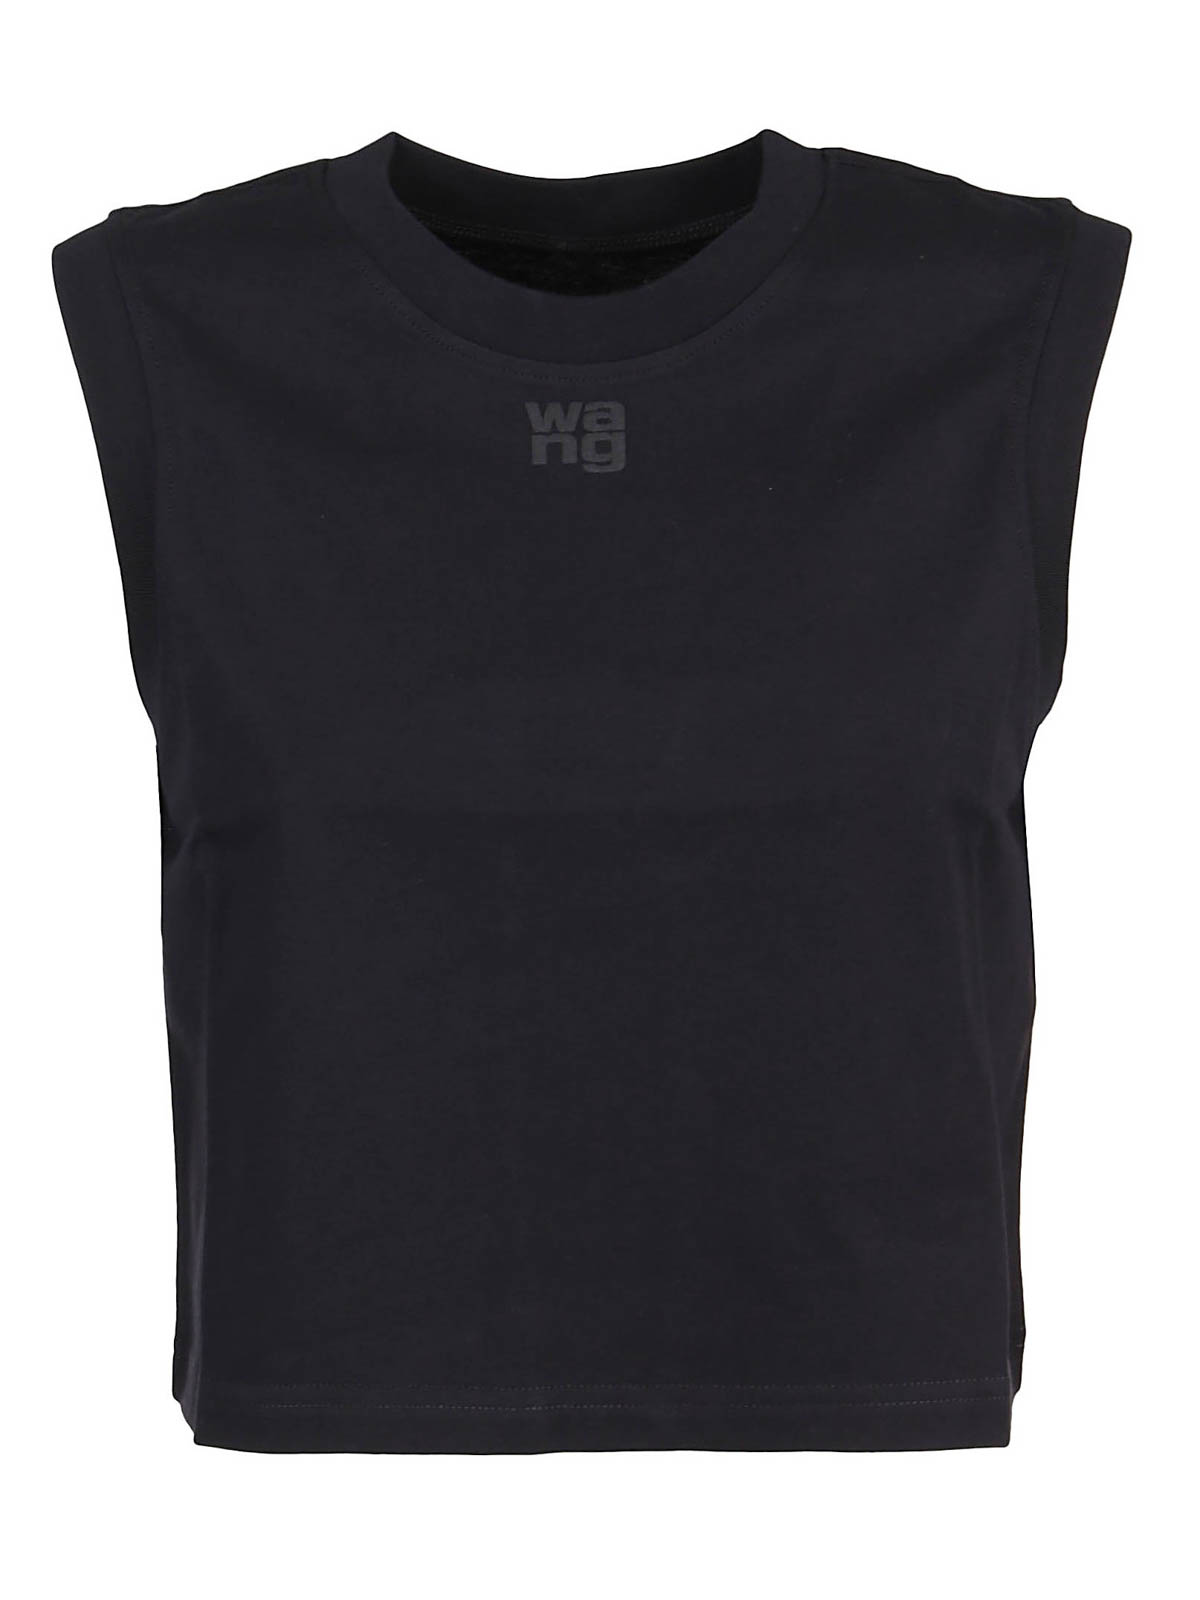 https://images.thebestshops.com/product_images/original/alexander-wang-tops--tank-tops-foundation-muscle-t-shirt-00000241505f00s021.jpg